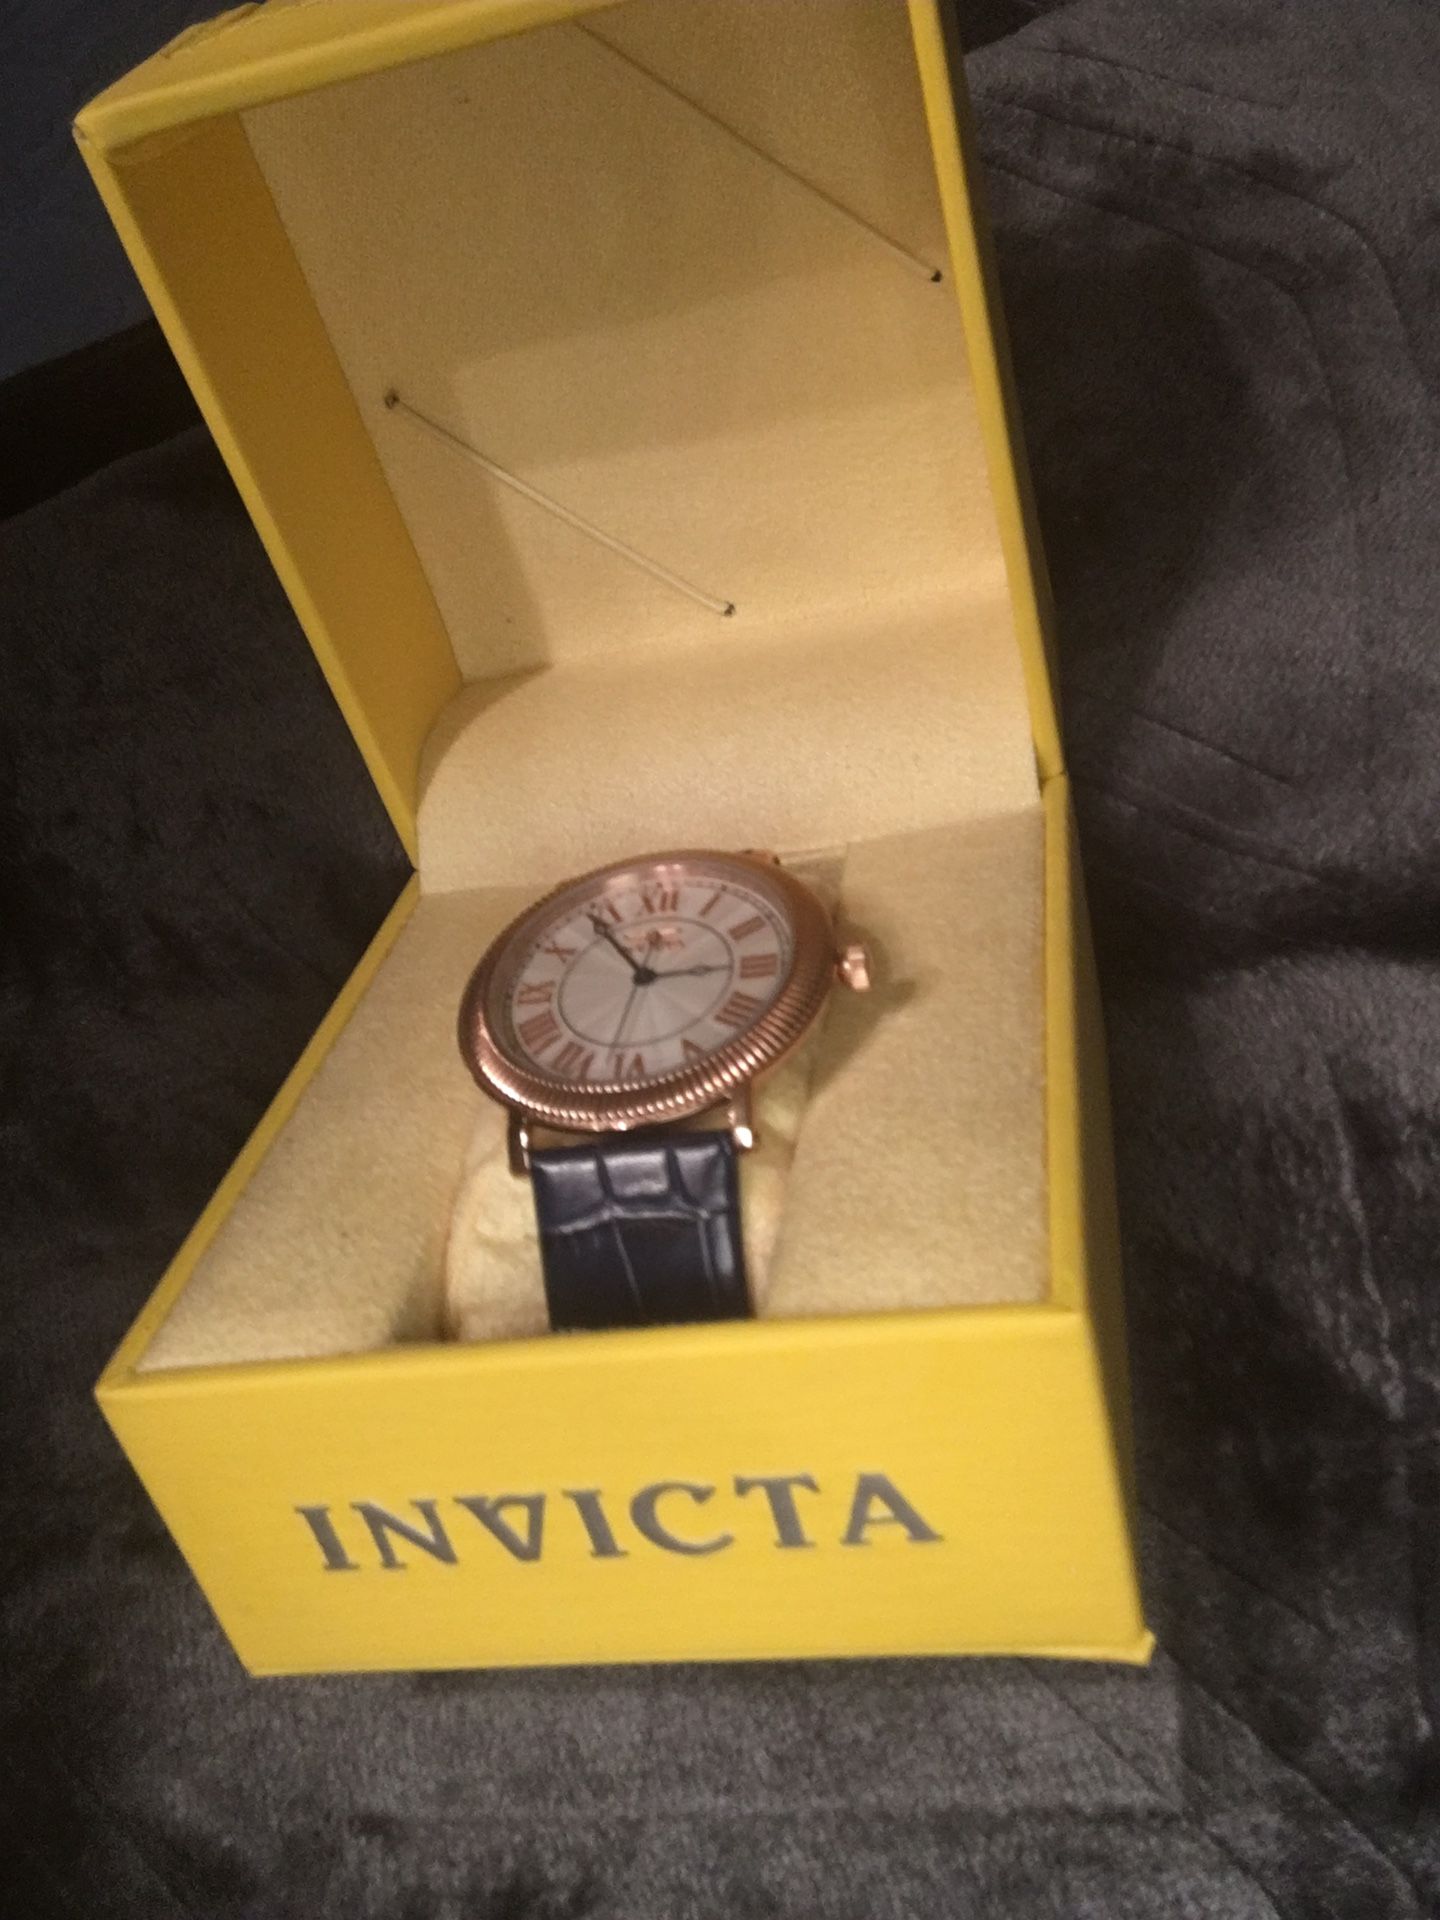 Invicata Mens Watch Model #7515 50MM Water Resistance. Stainless Steel Casing